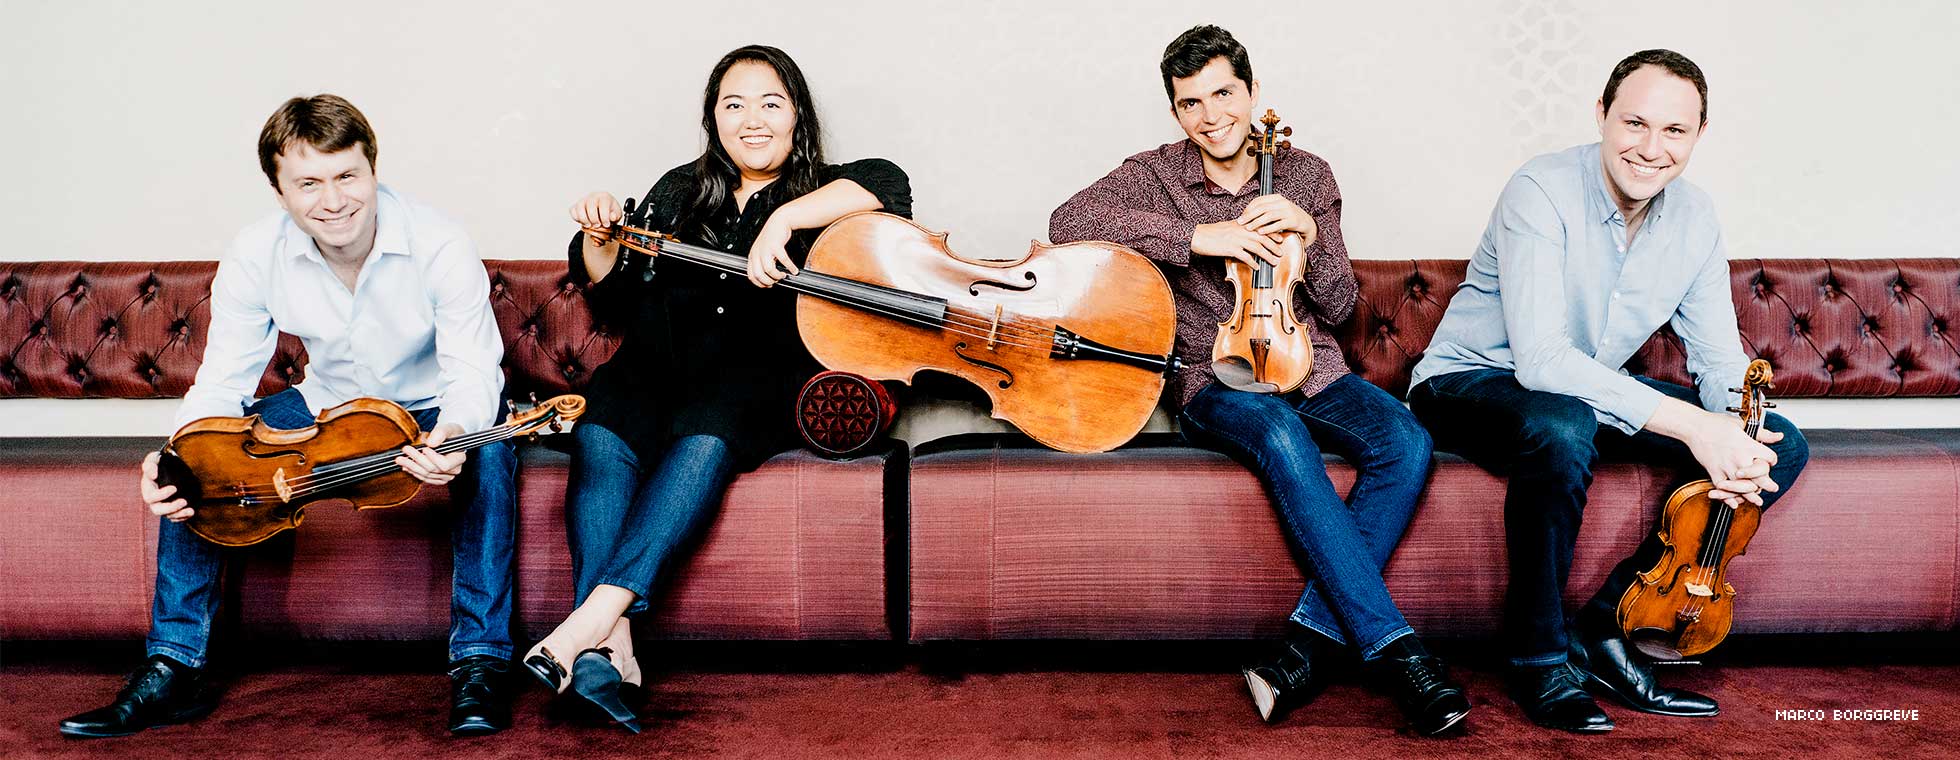 Four musicians sit casually on a couch with their instruments and smile.